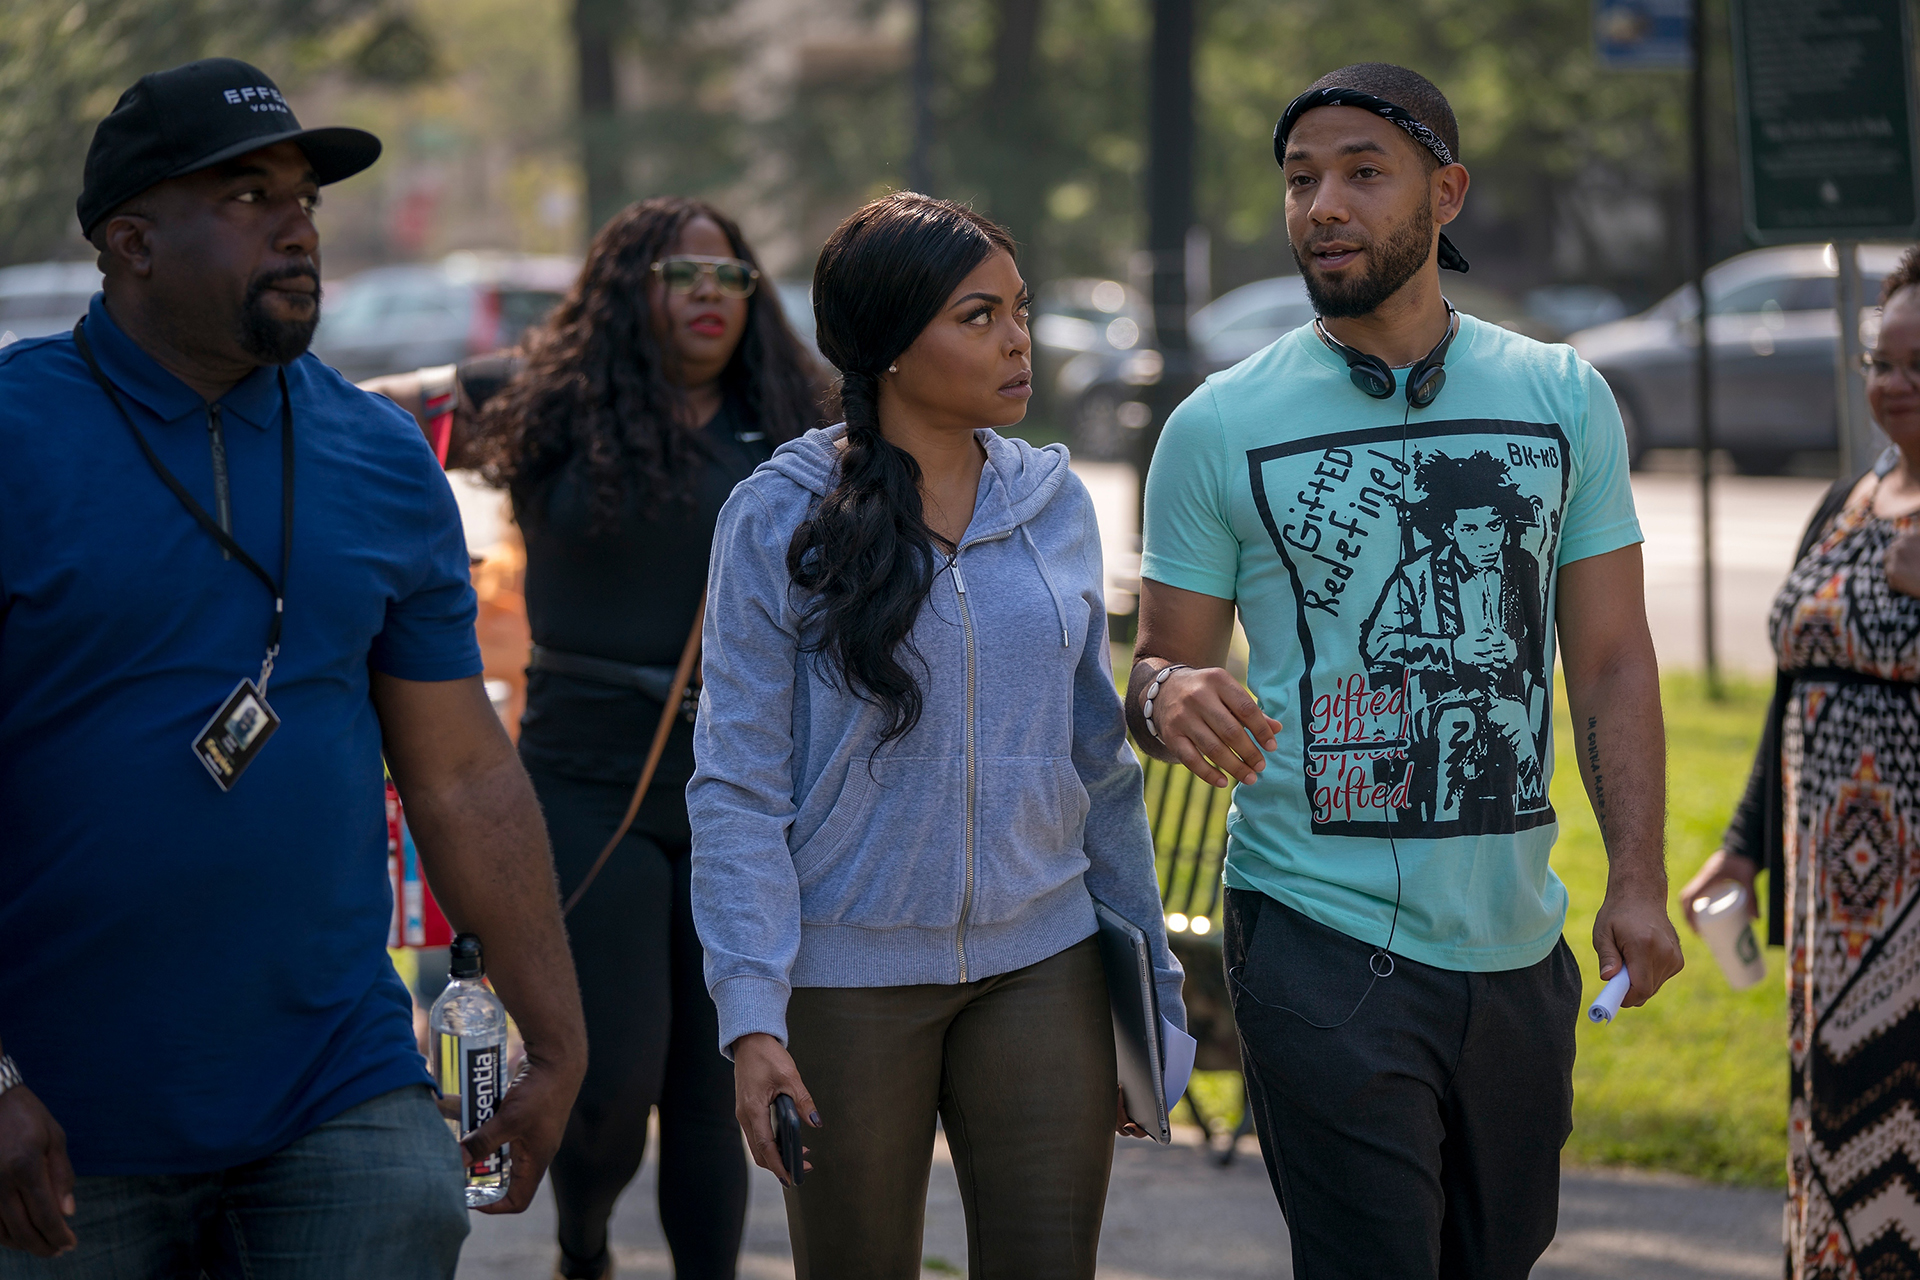 Taraji P. Henson and director Jussie Smollett in the &quot;What is Done&quot; episode of EMPIRE